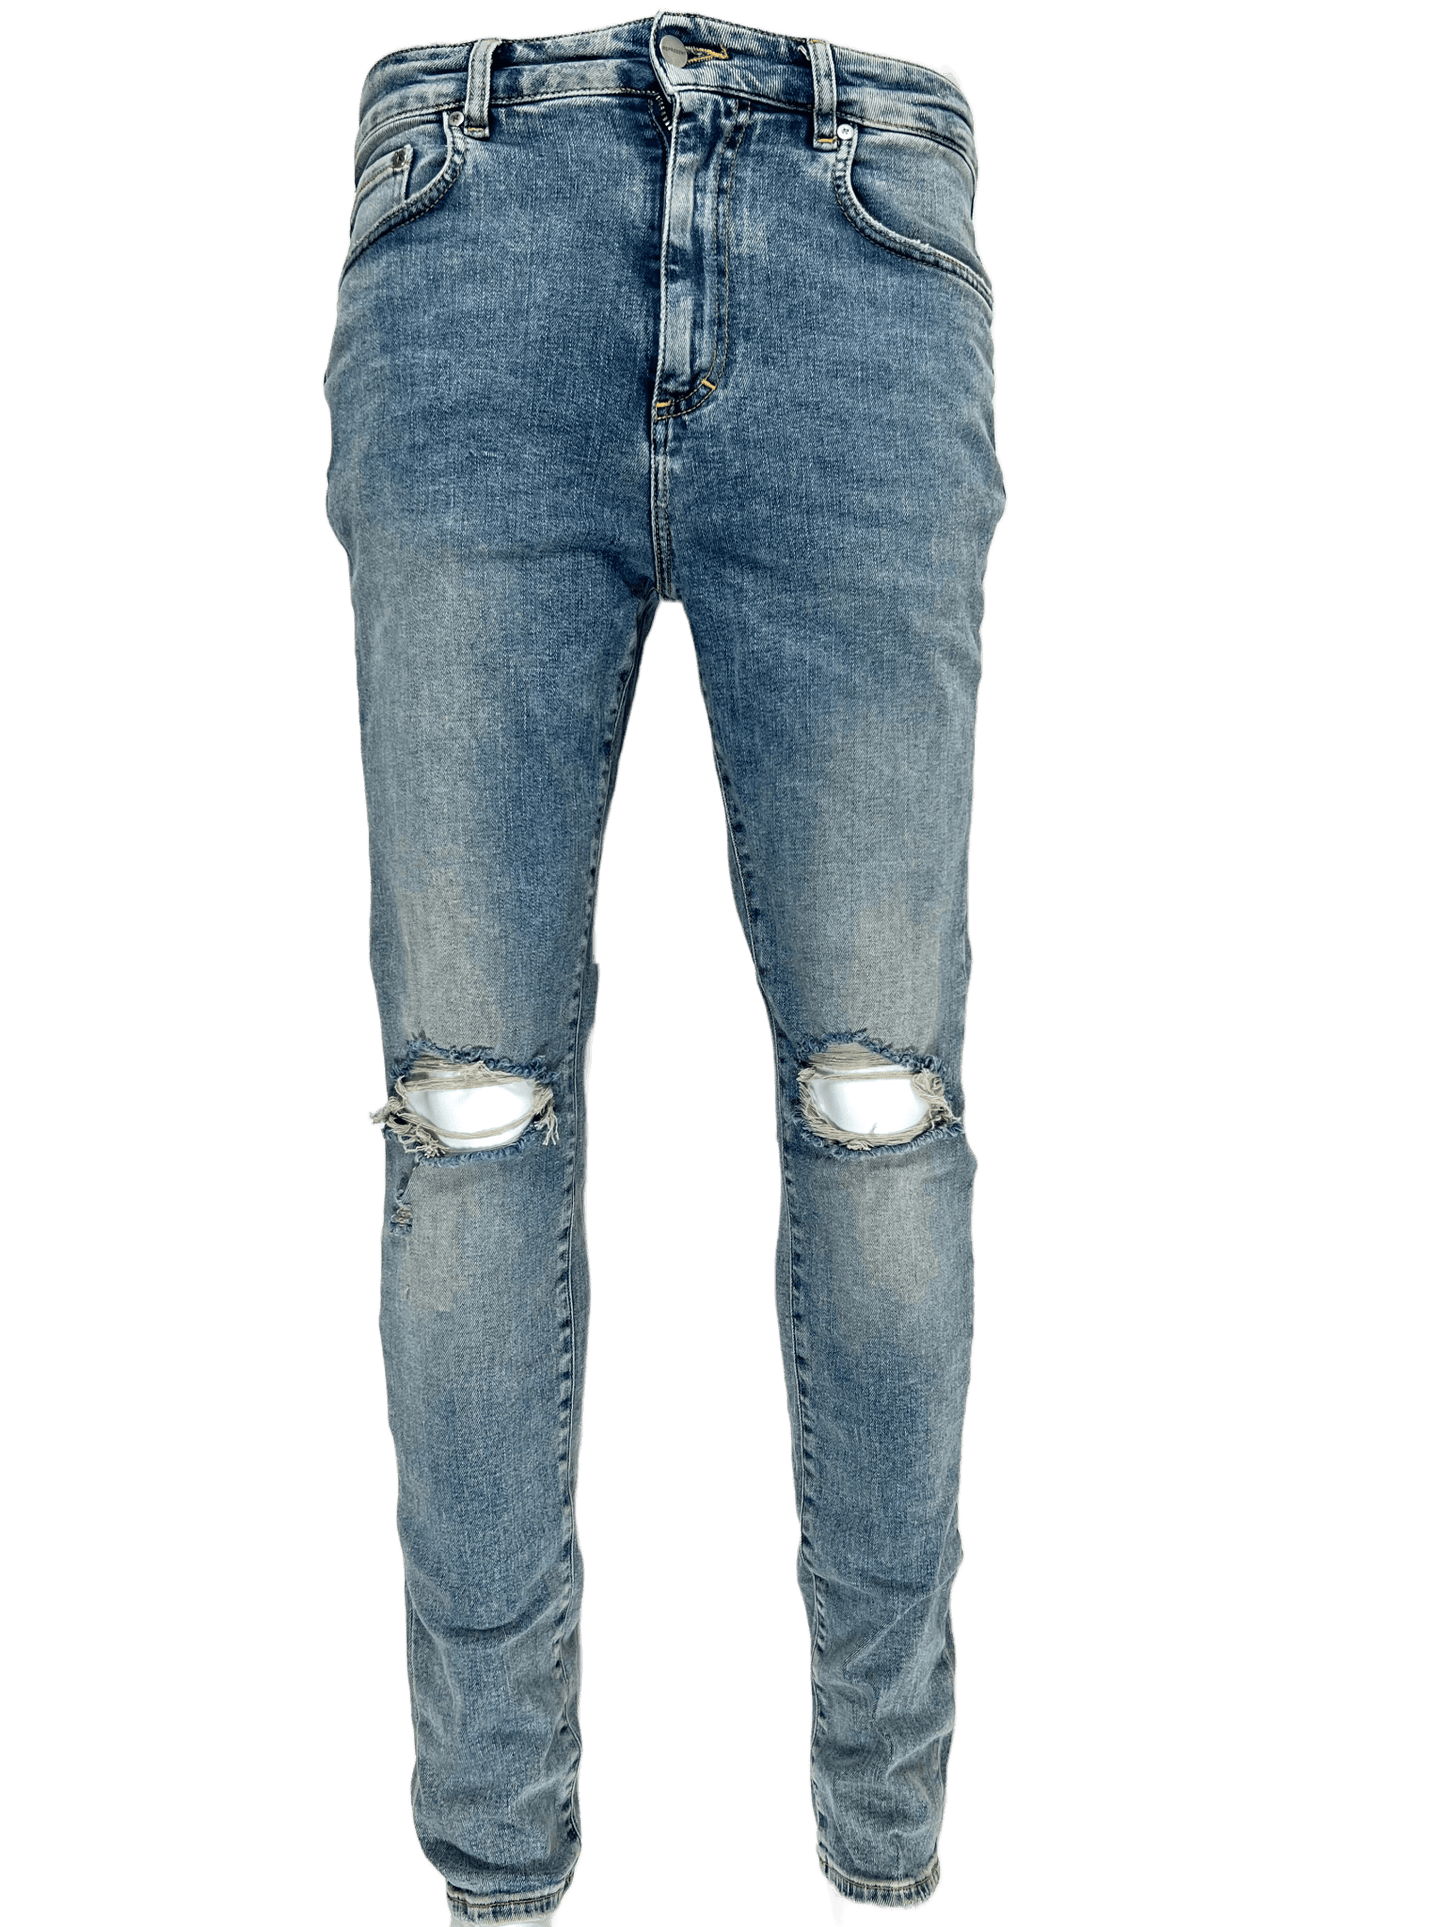 A pair of REPRESENT men's jeans with distressed detailing and holes on the knees.